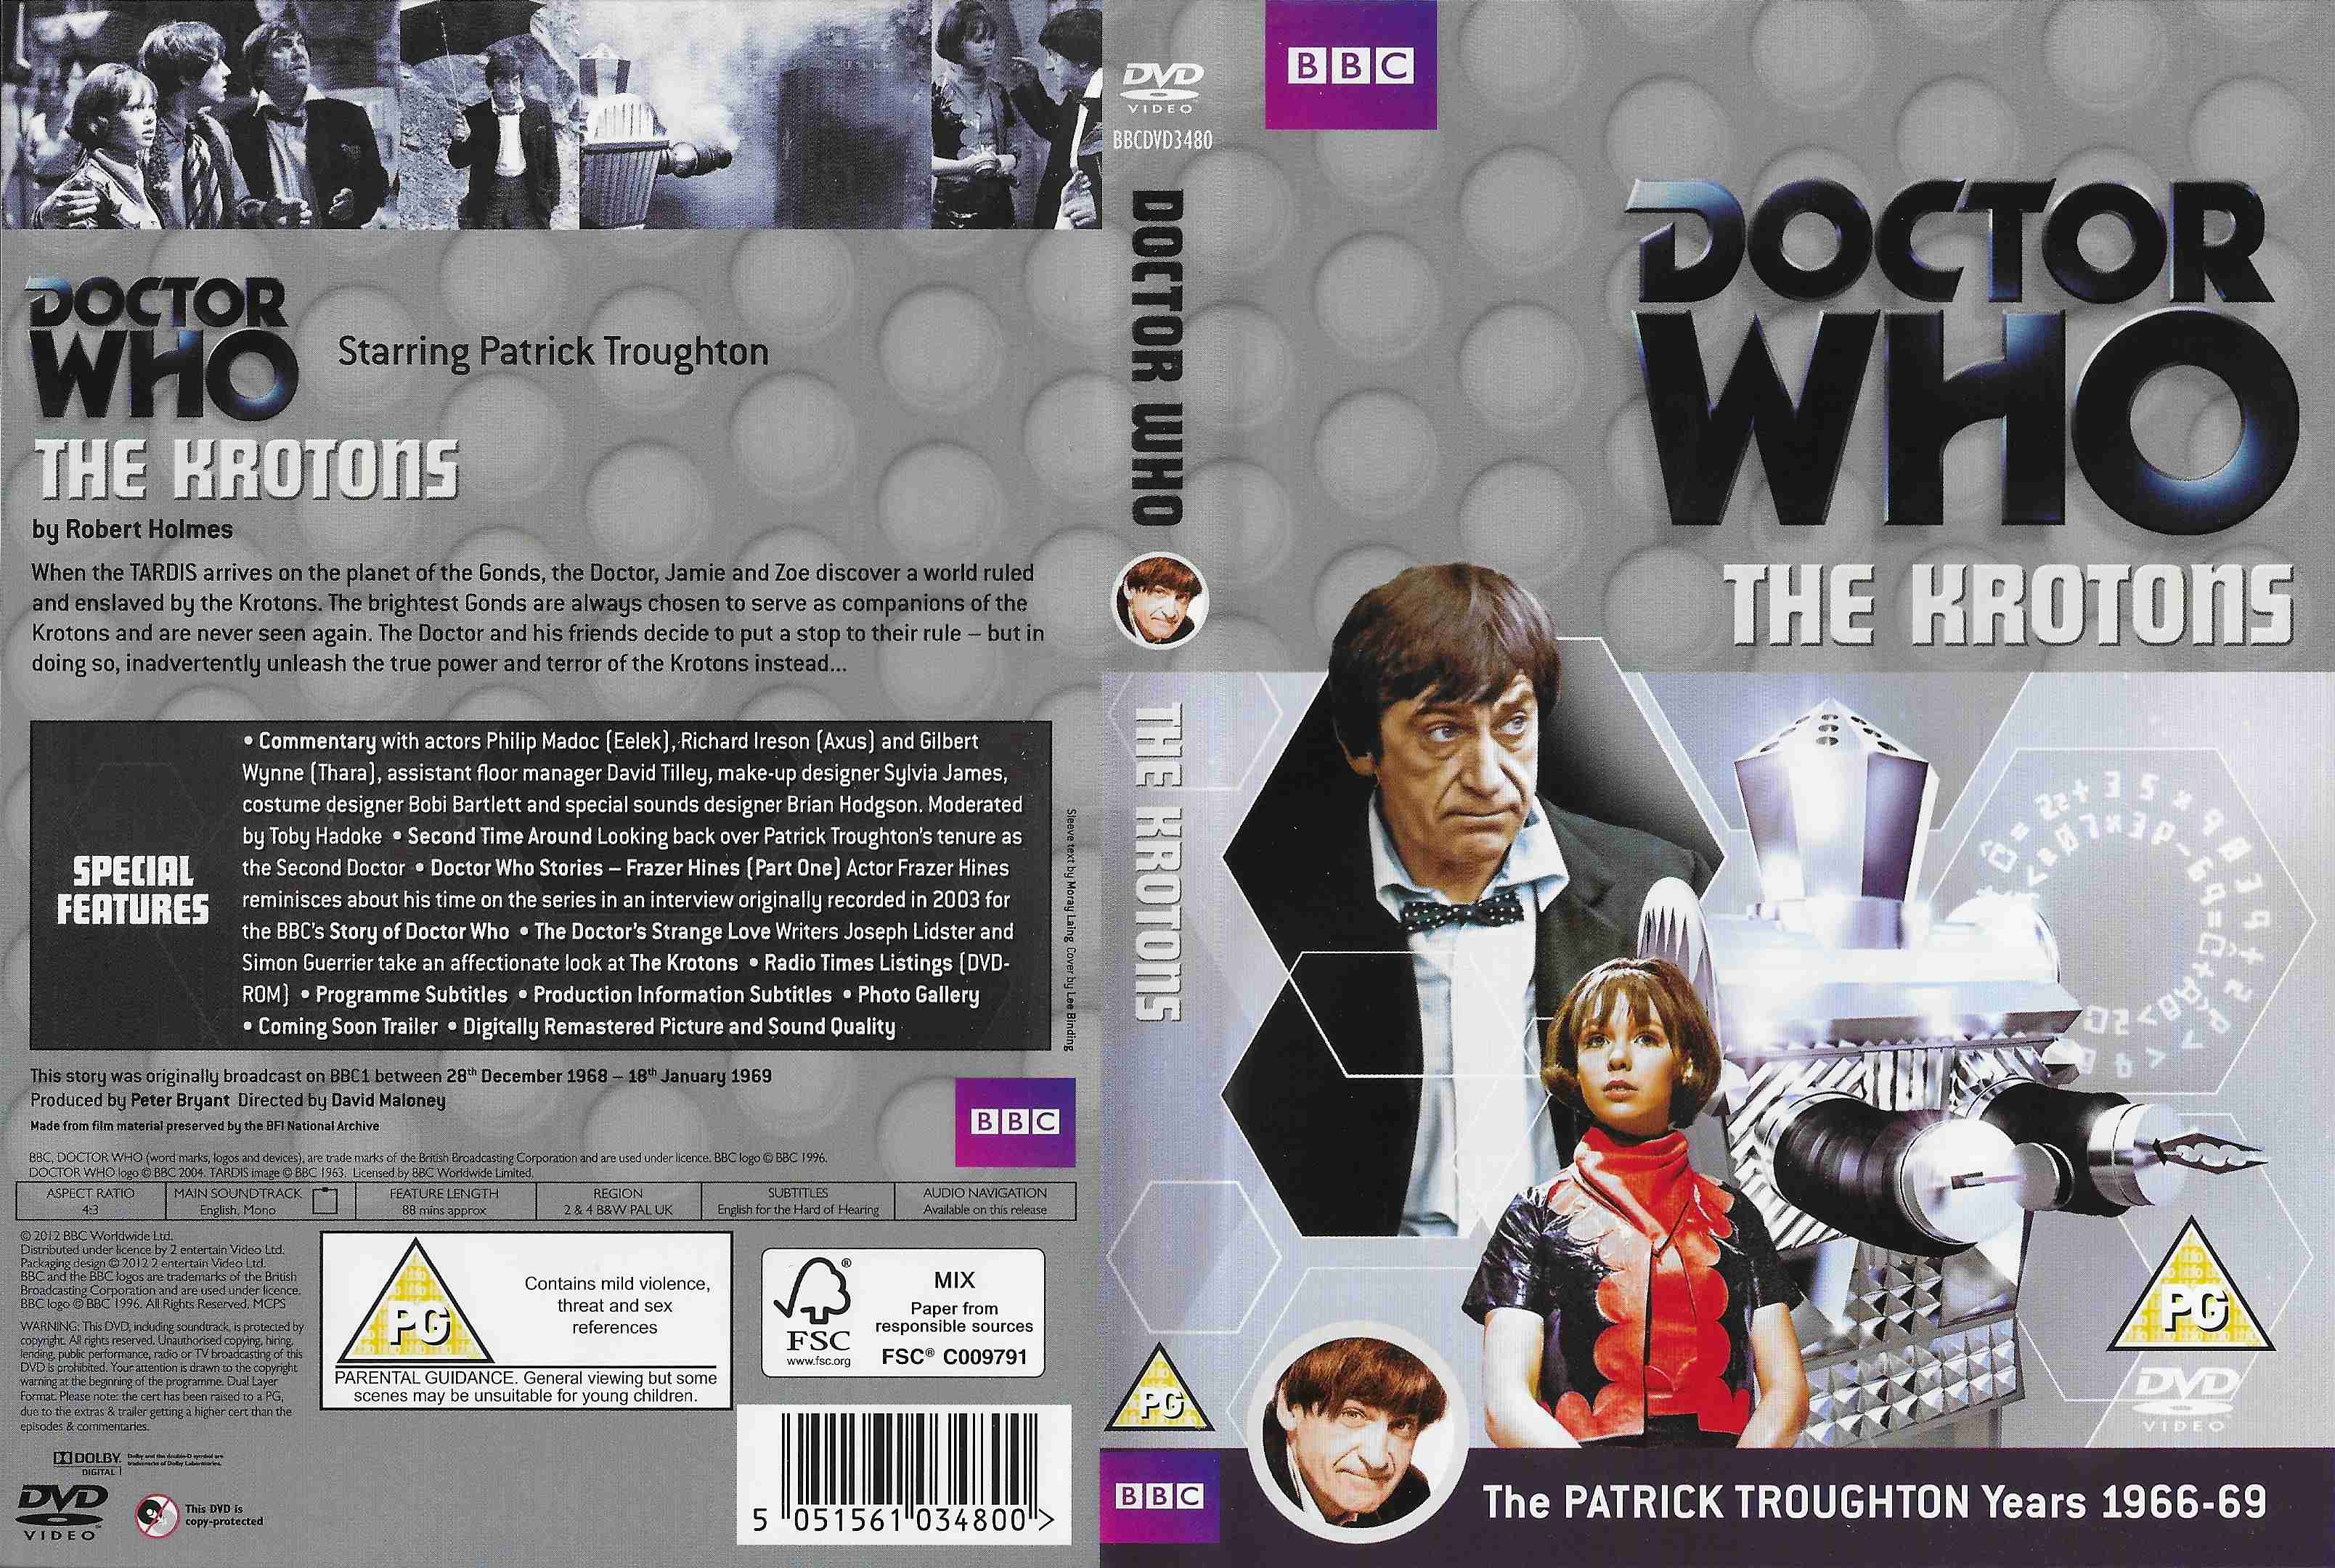 Picture of BBCDVD 3480 Doctor Who - The Krotons by artist Robert Holmes from the BBC records and Tapes library